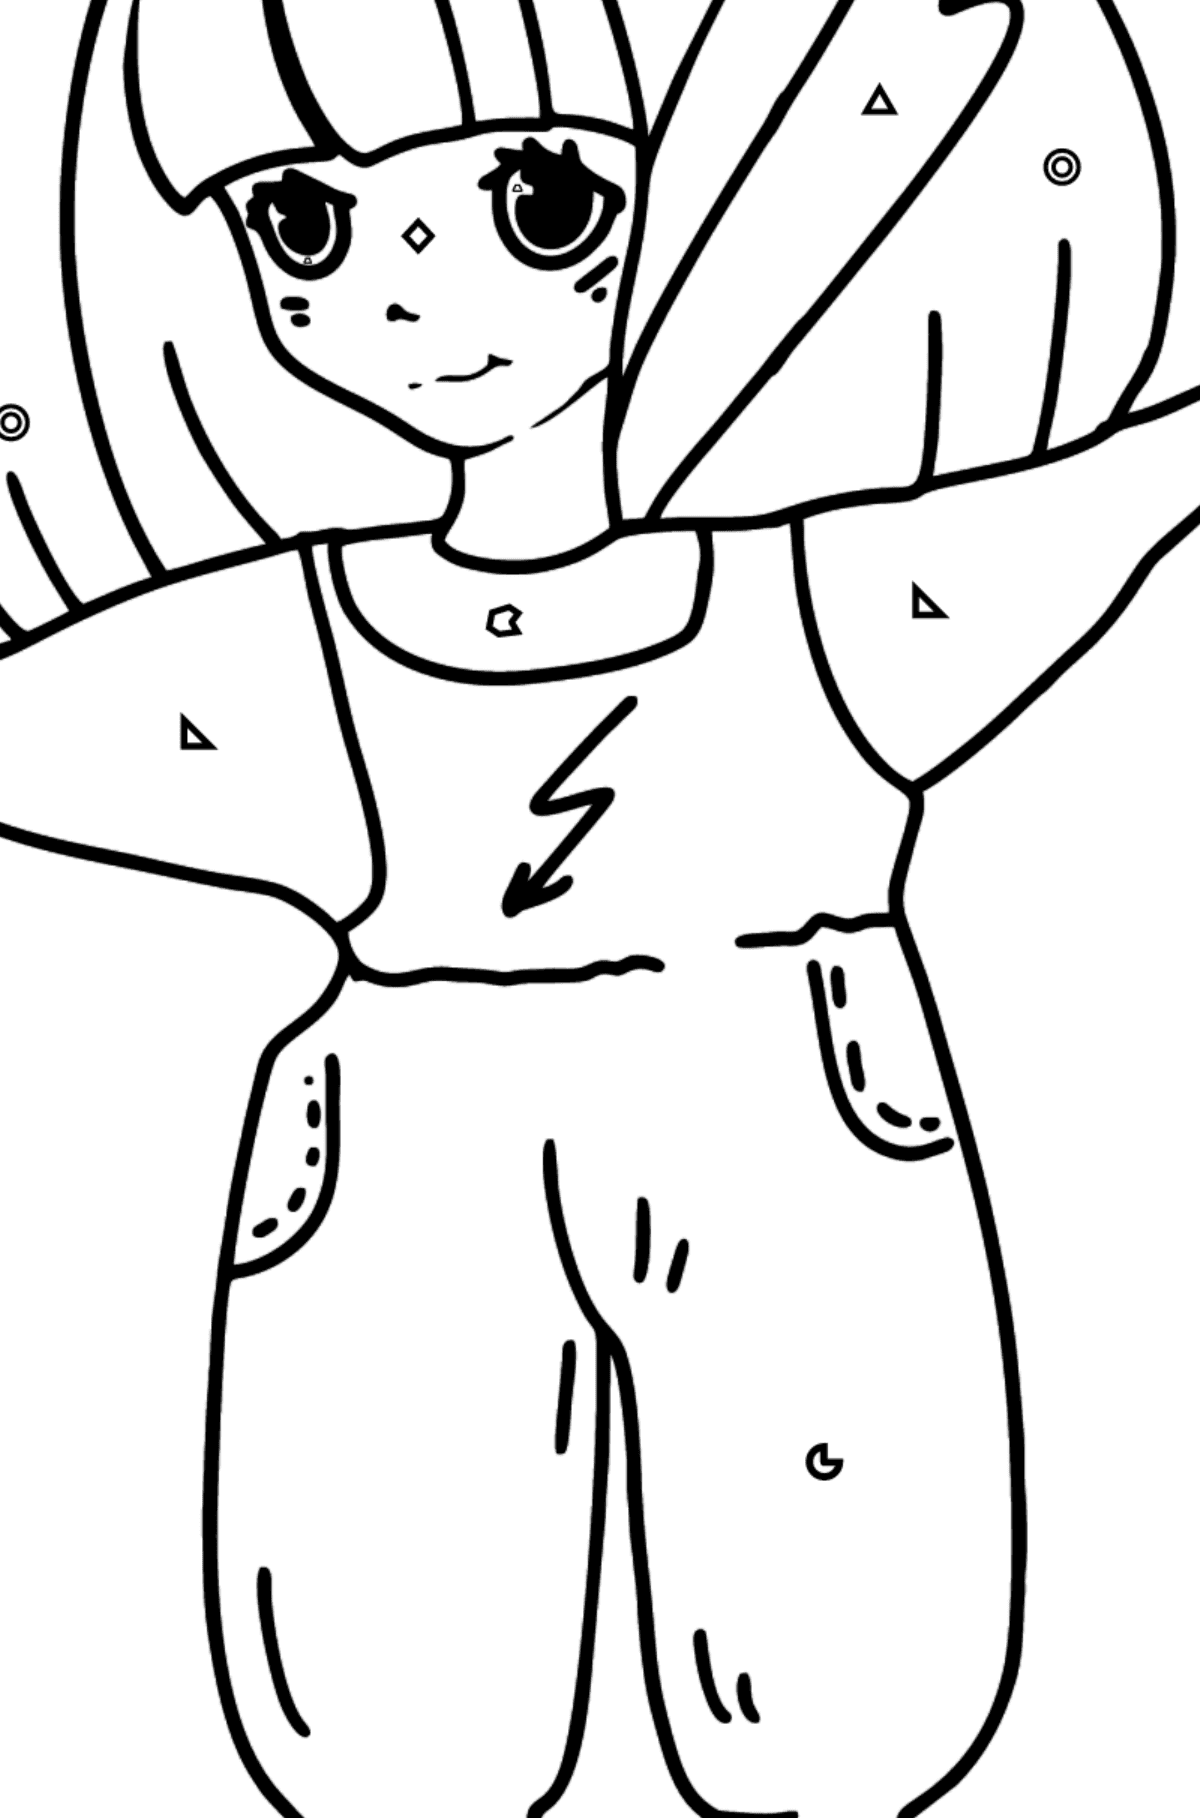 Thunder Anime Girl Coloring Pages - Coloring by Geometric Shapes for Kids